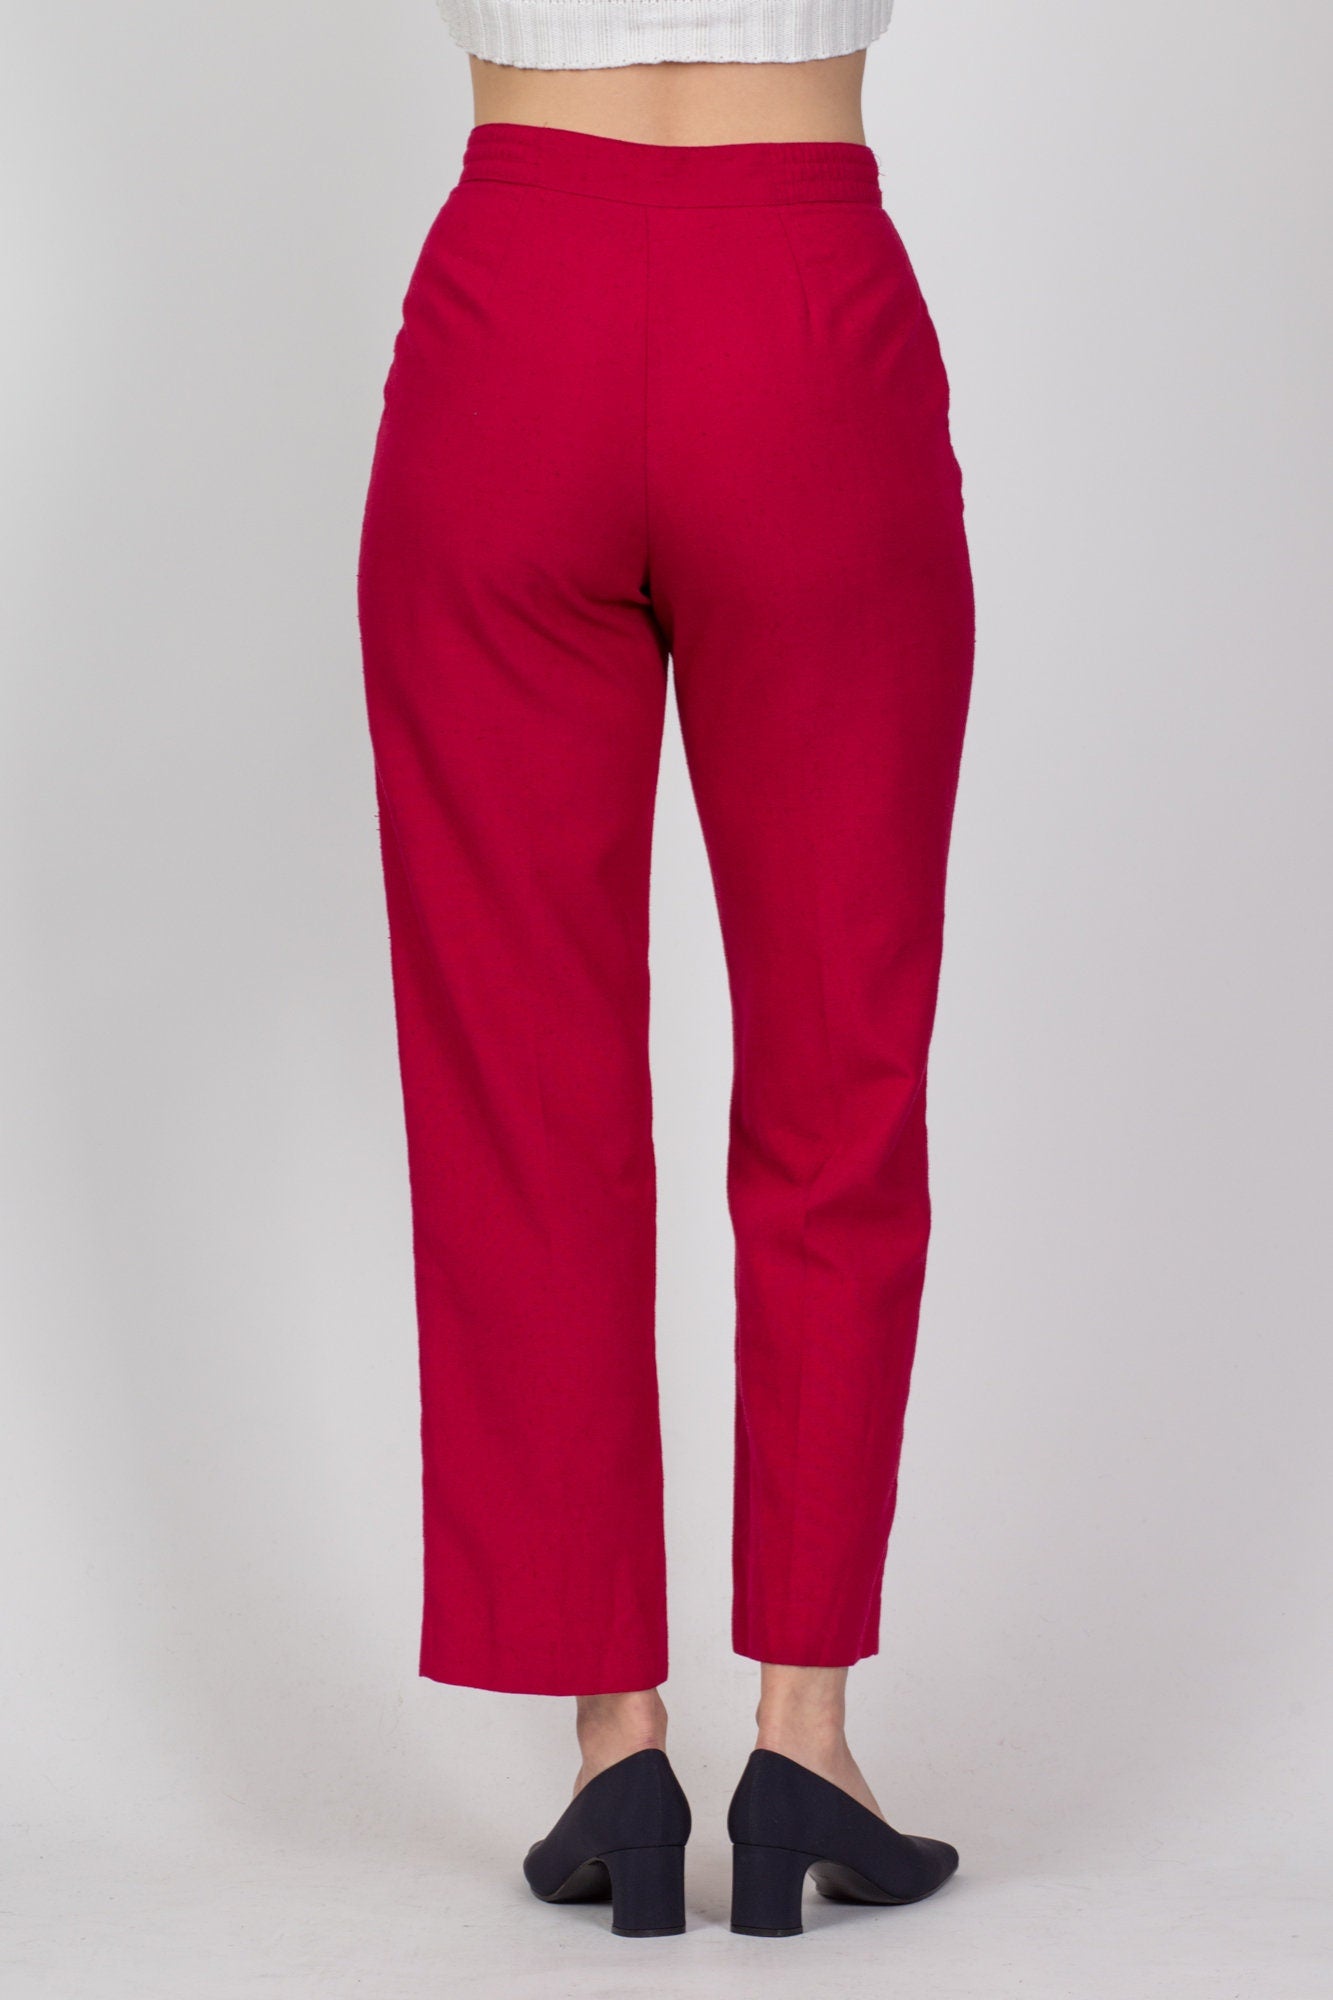 Vintage High Waist Raspberry Pink Trousers - Small to Medium 